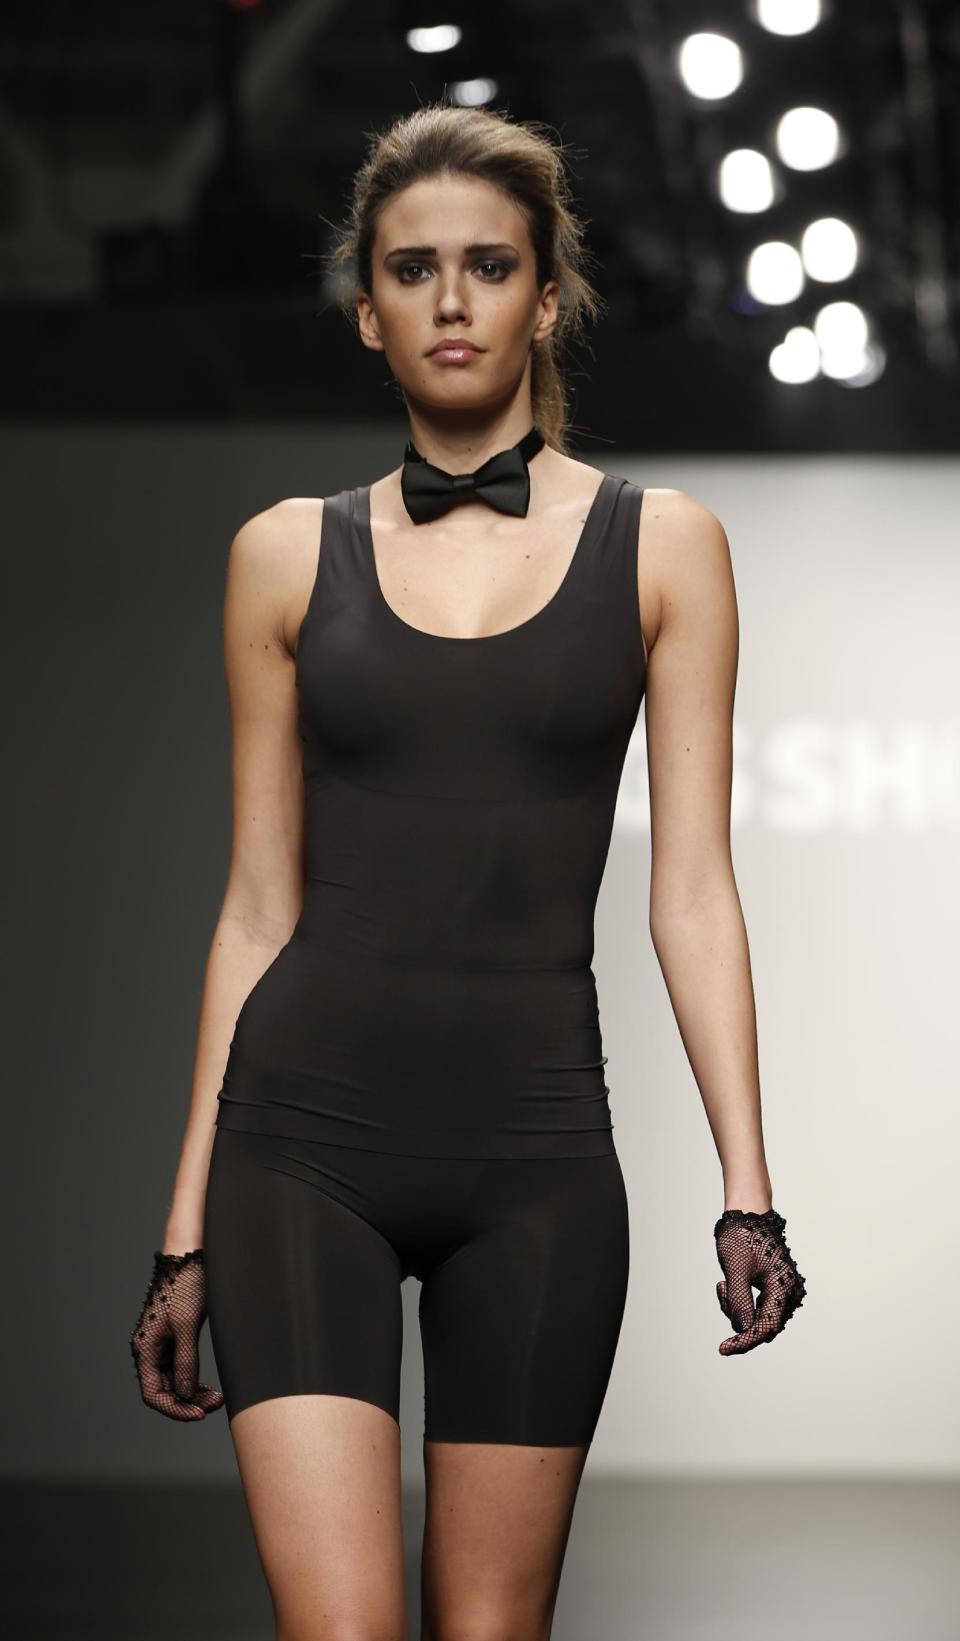 CAPTION CORRECTION, CORRECTS TO REMOVE REFERENCE TO ANNA SUI, WHOSE COLLECTION WAS NOT REPRESENTED AT THIS SHOW - A model walks the runway during the presentation of the GS Shop Lingerie show featuring Spanx, Wonderbra, and Platex during Fashion Week Tuesday, Feb. 4, 2014, in New York. (AP Photo/Kathy Willens)